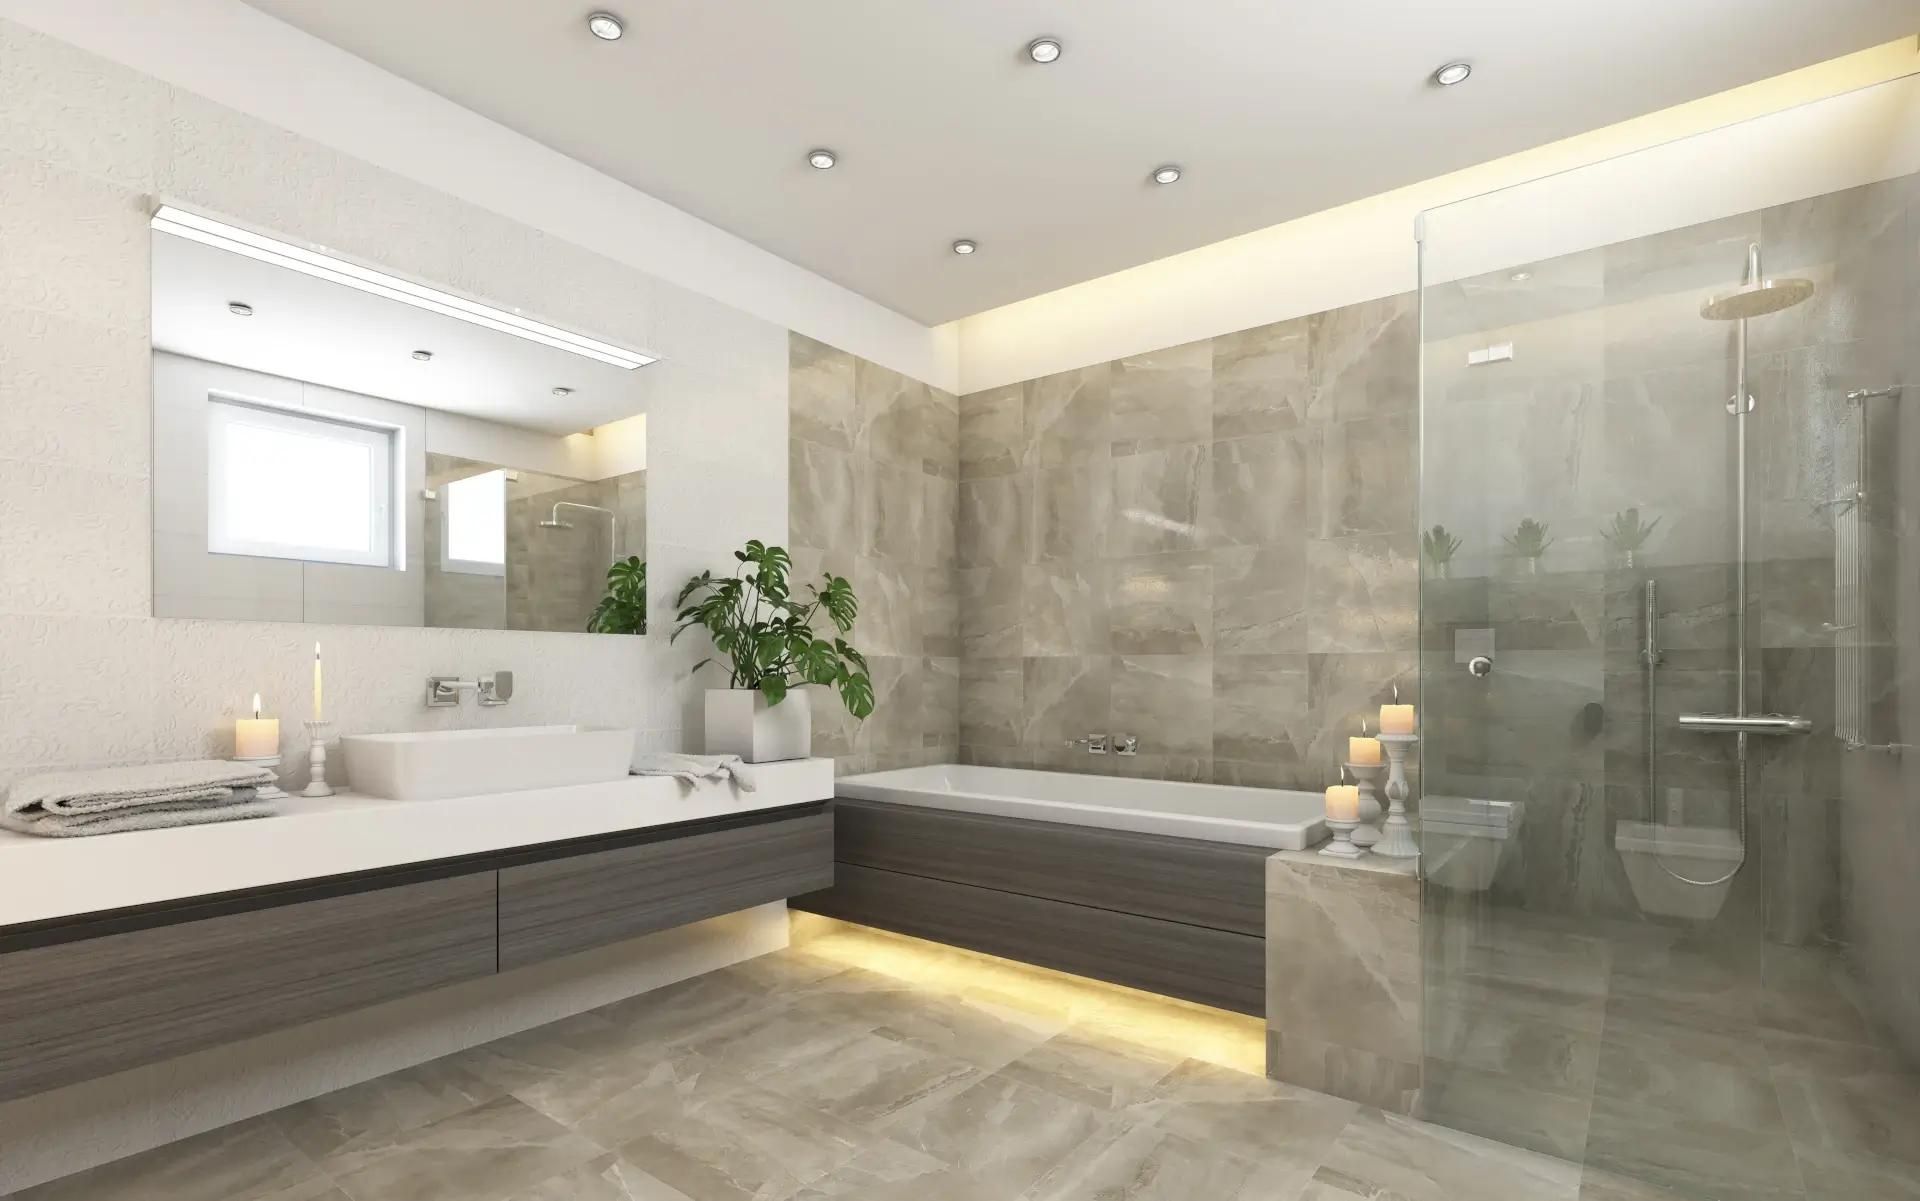 Why You Should Leave Bathroom Renovations to Licensed Professionals